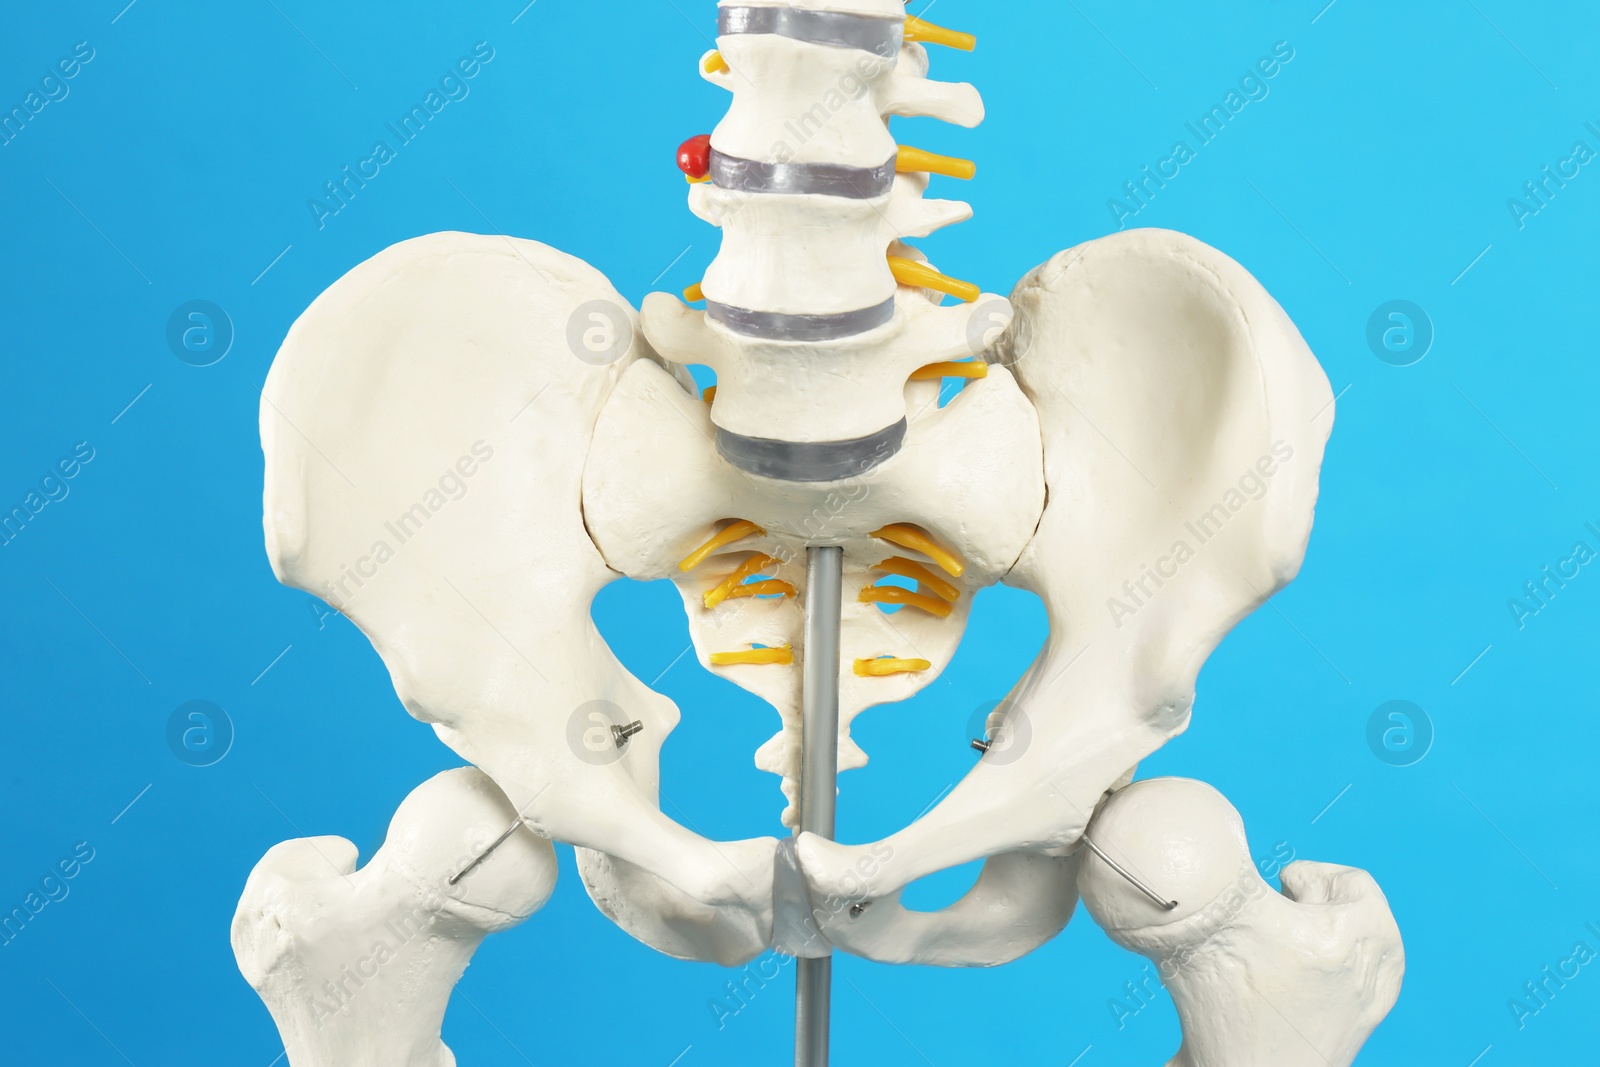 Photo of Artificial human skeleton model on blue background, closeup